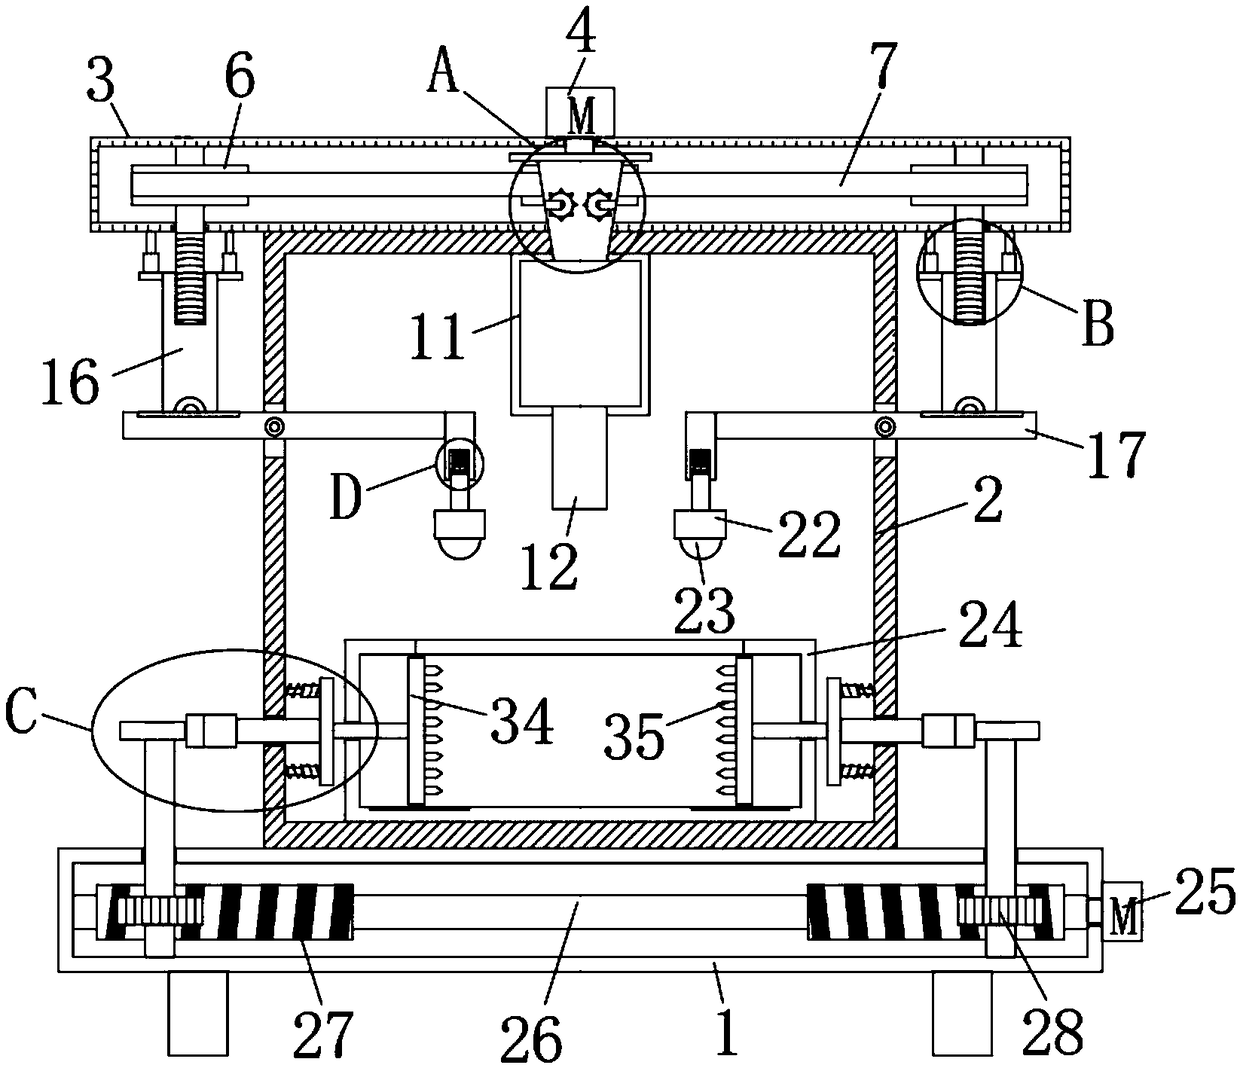 Fish meat stuffing making device for fish balls